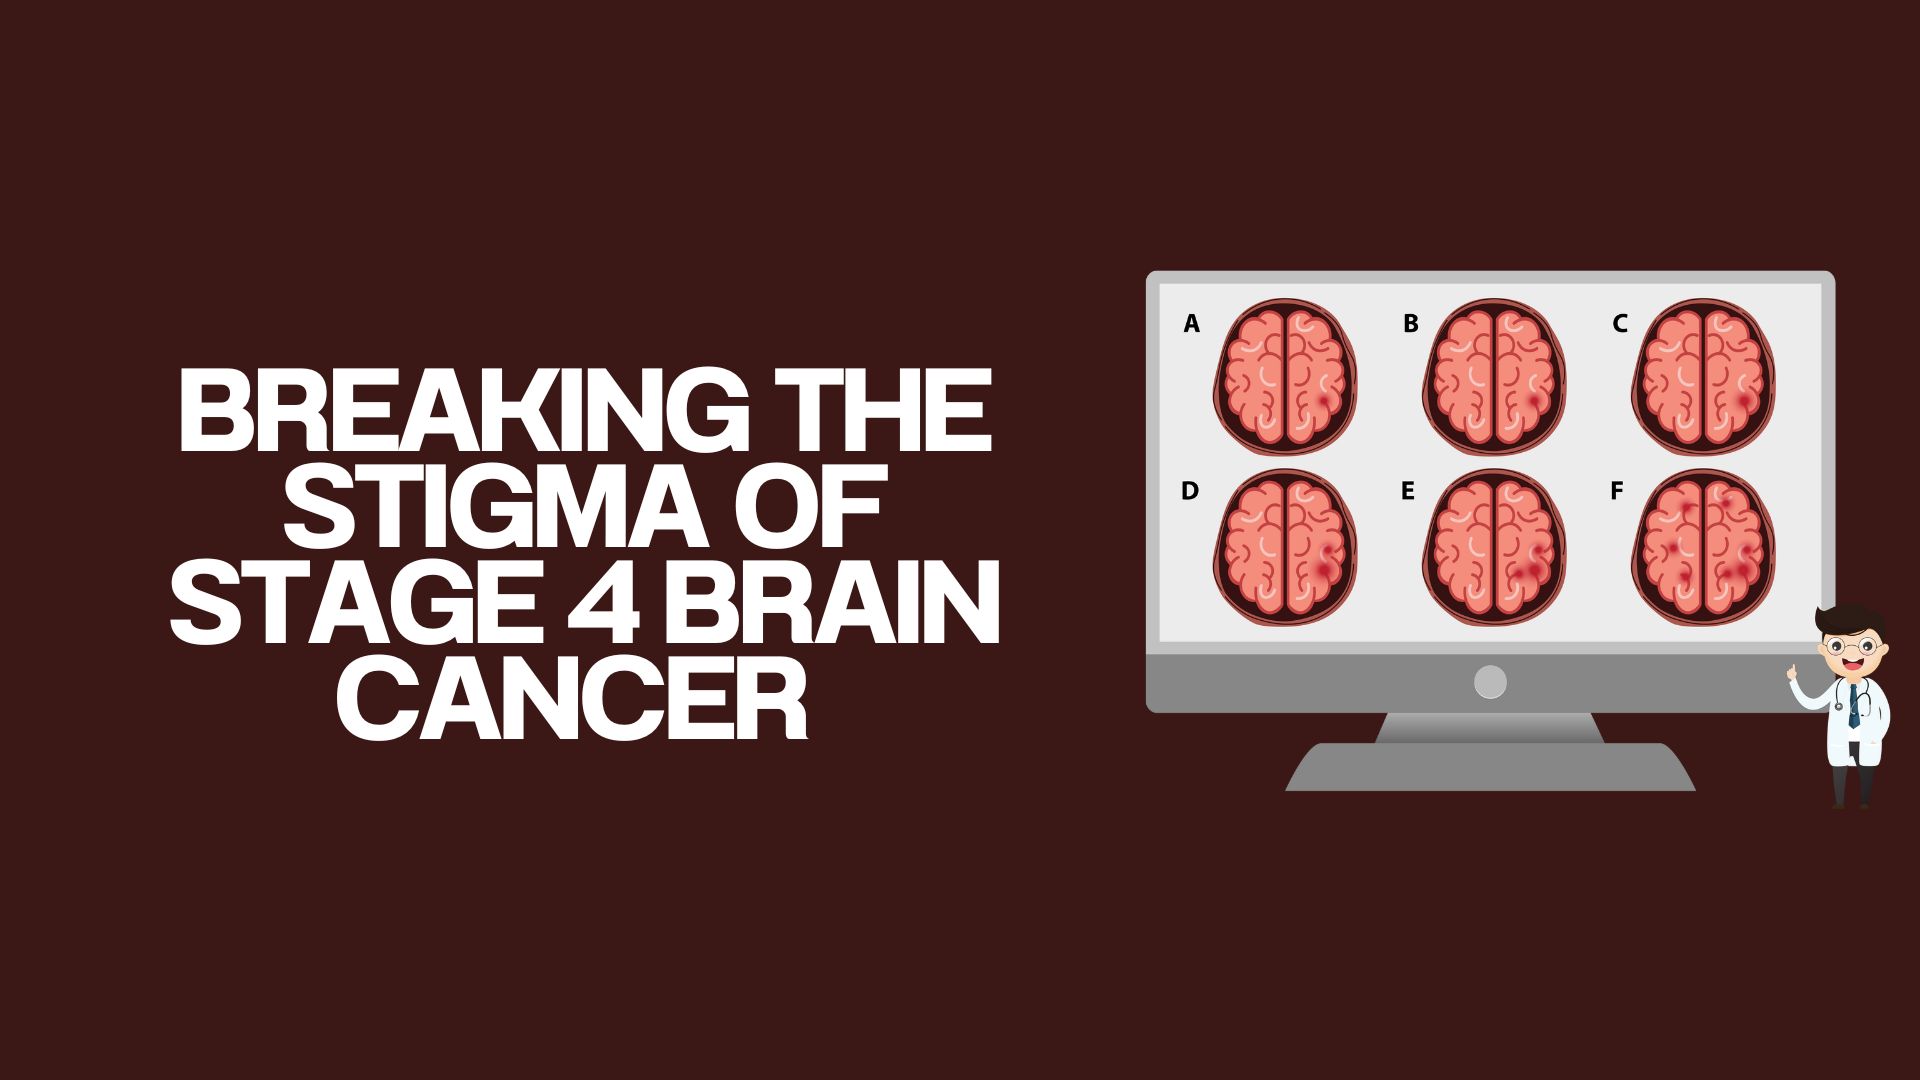 Breaking the Stigma of Stage 4 Brain Cancer